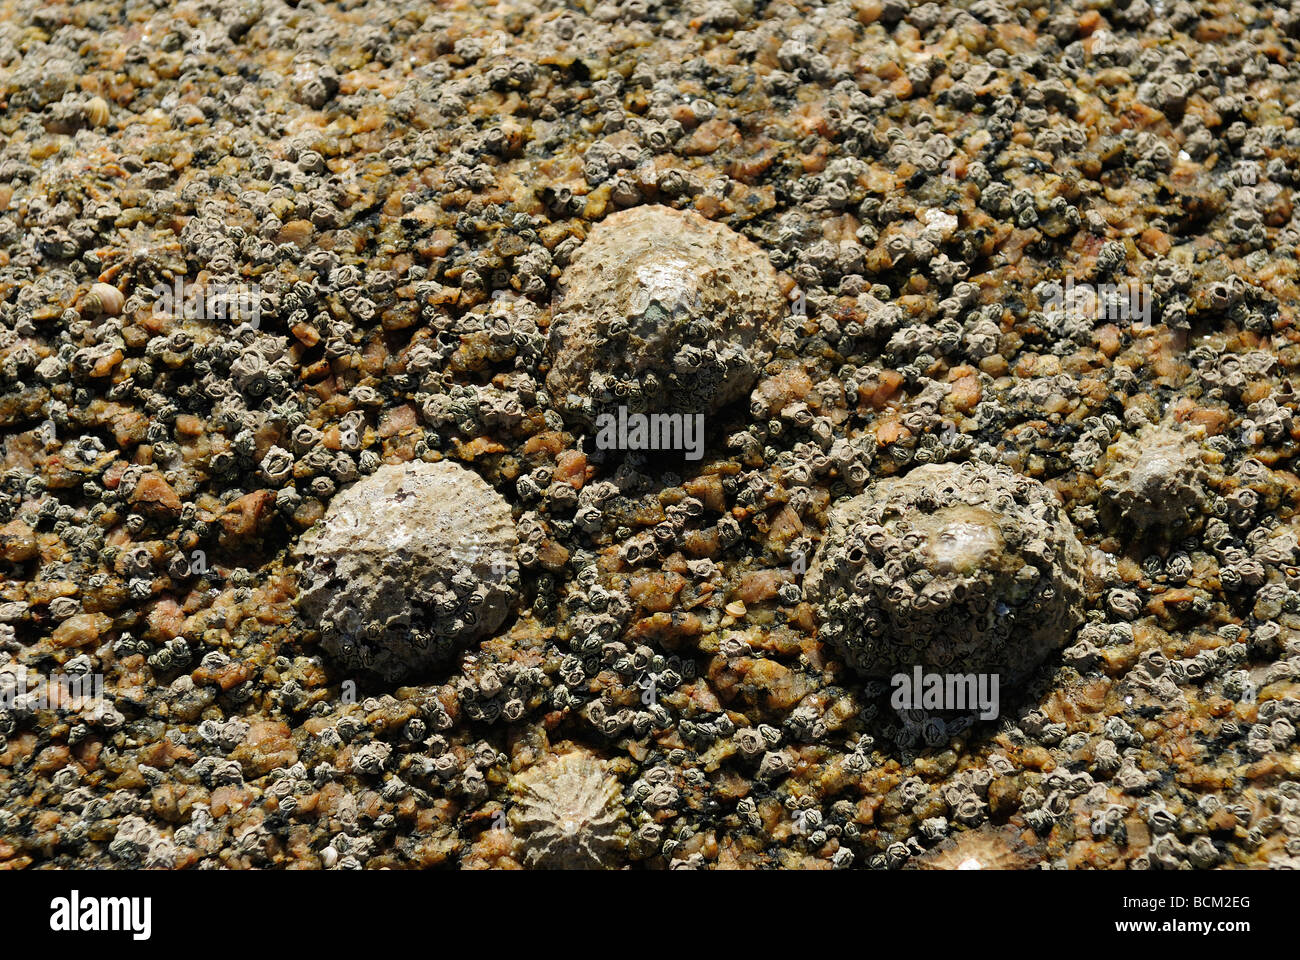 Common limpet on a rock in the Bay of Morlaix, France Stock Photo